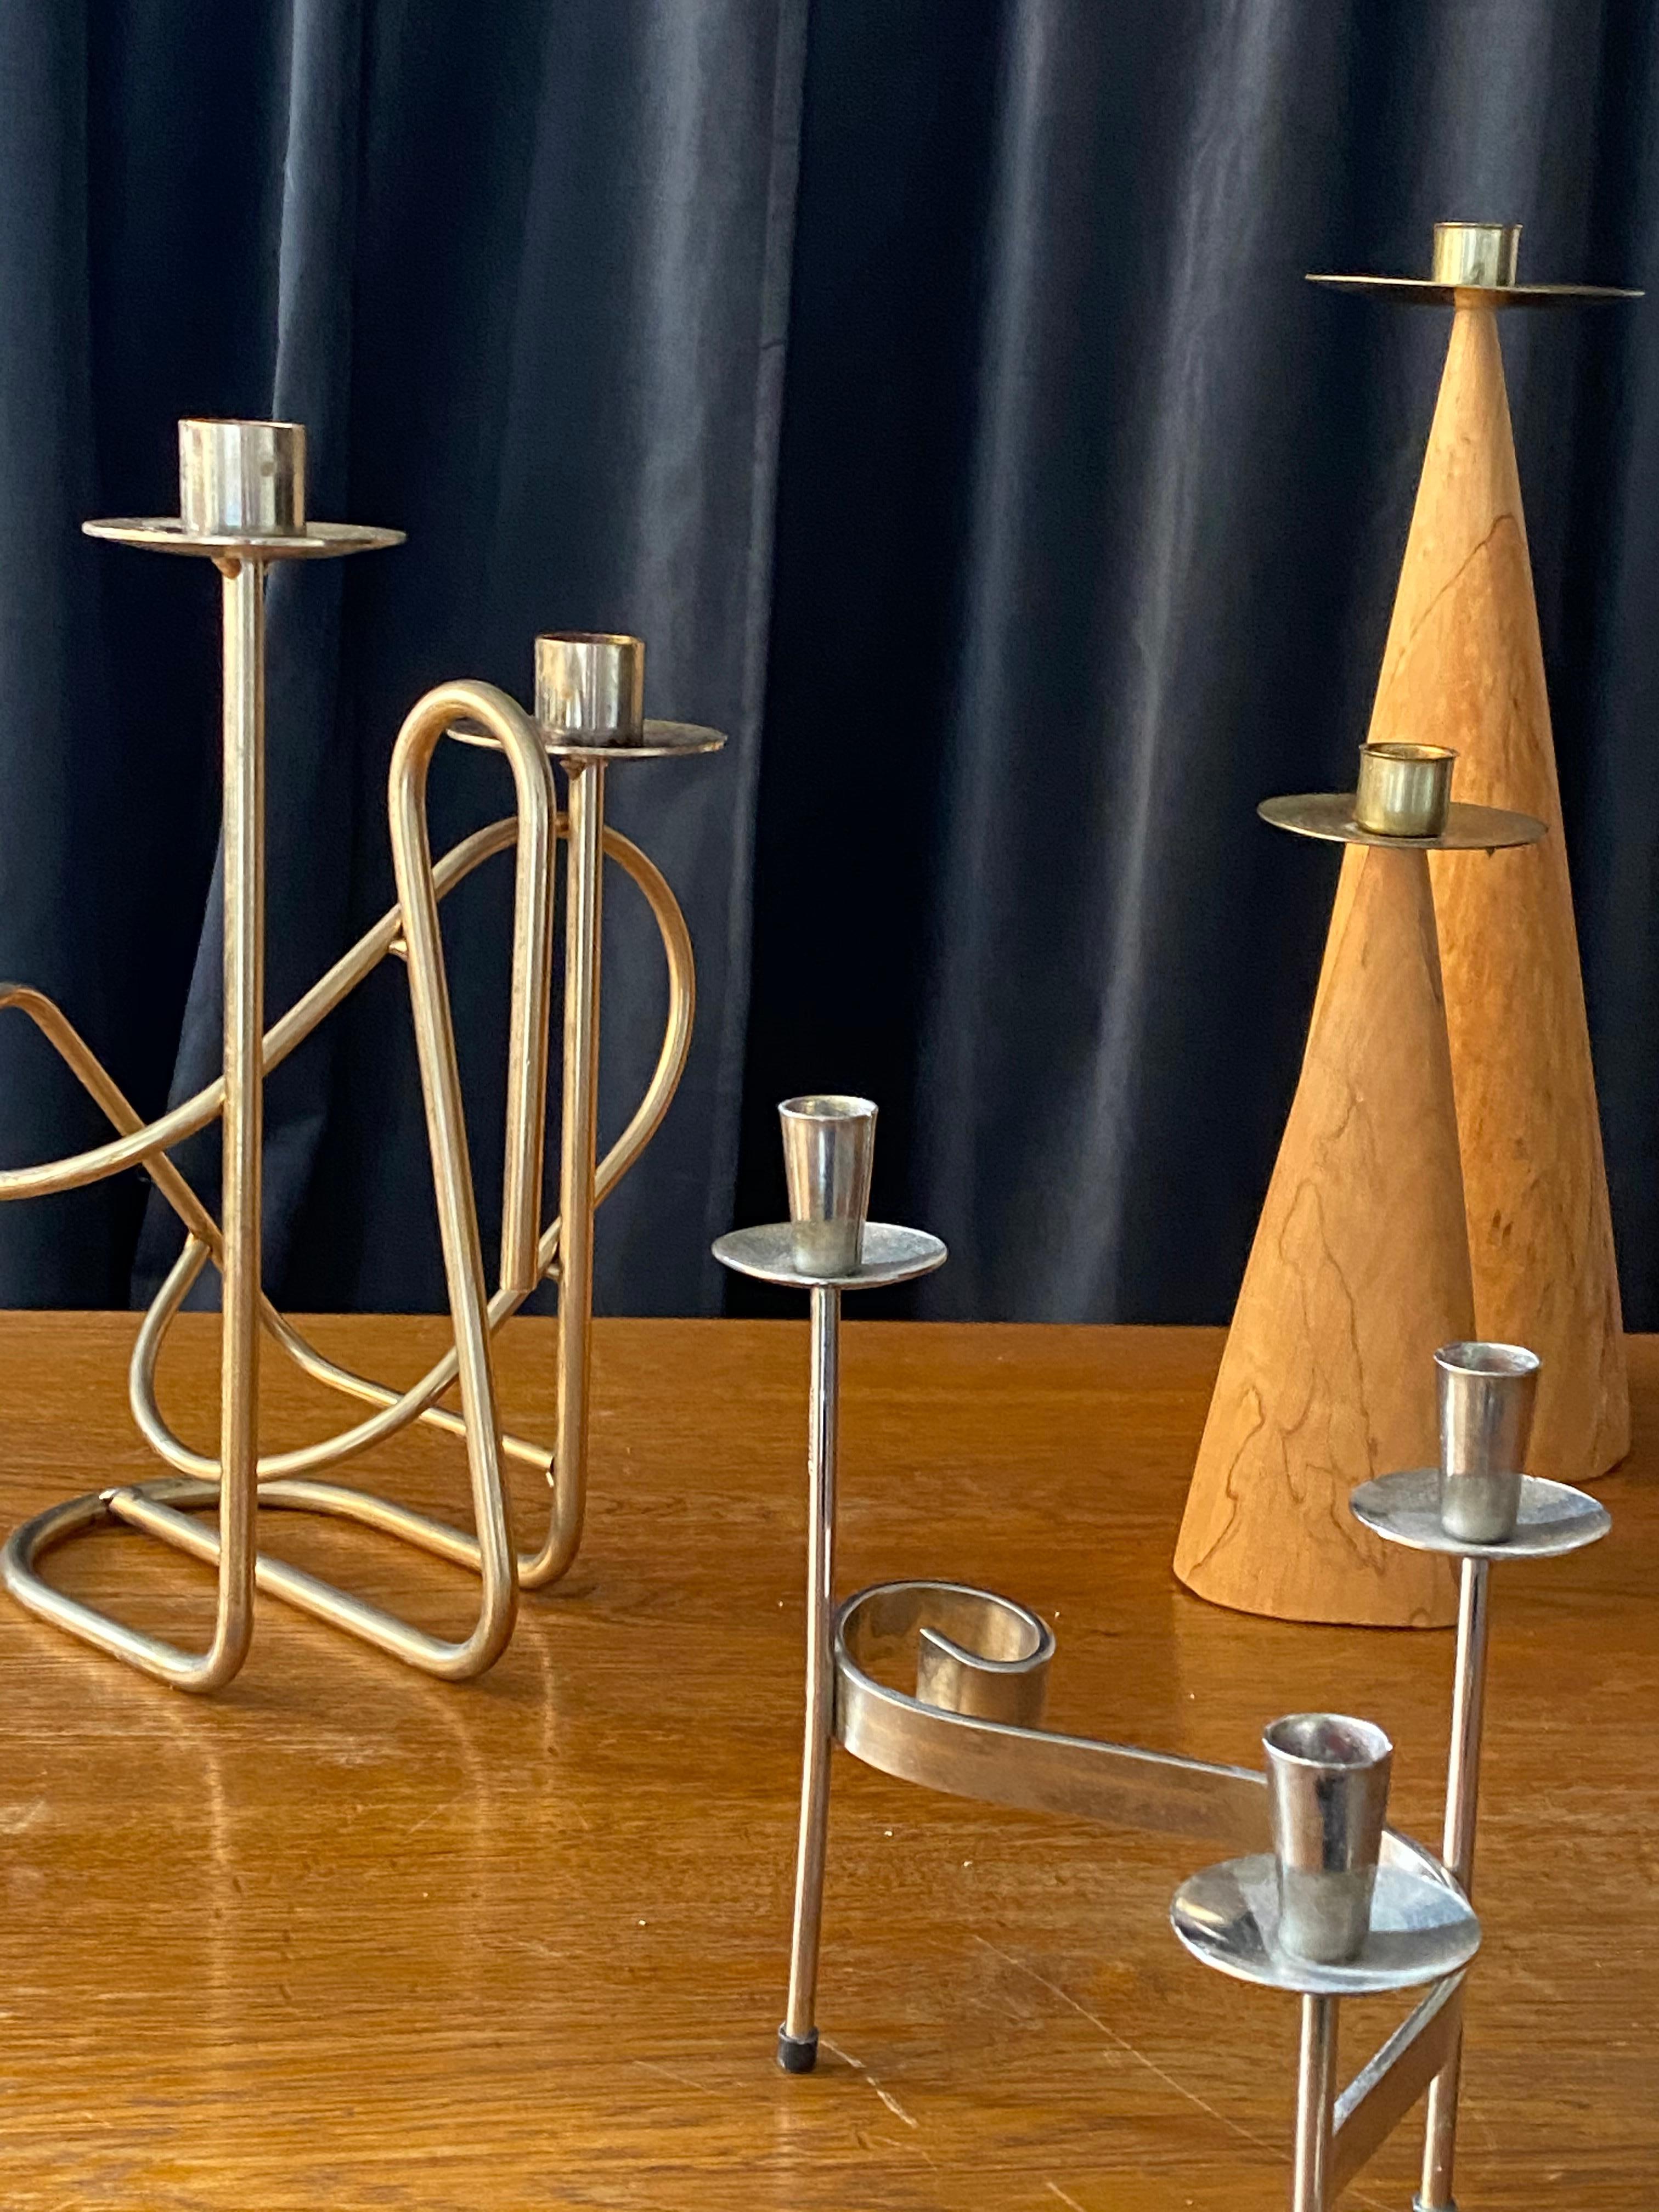 Mid-20th Century Swedish Design, Collection of Candlesticks or Candelabra, Wood, Brass, Steel